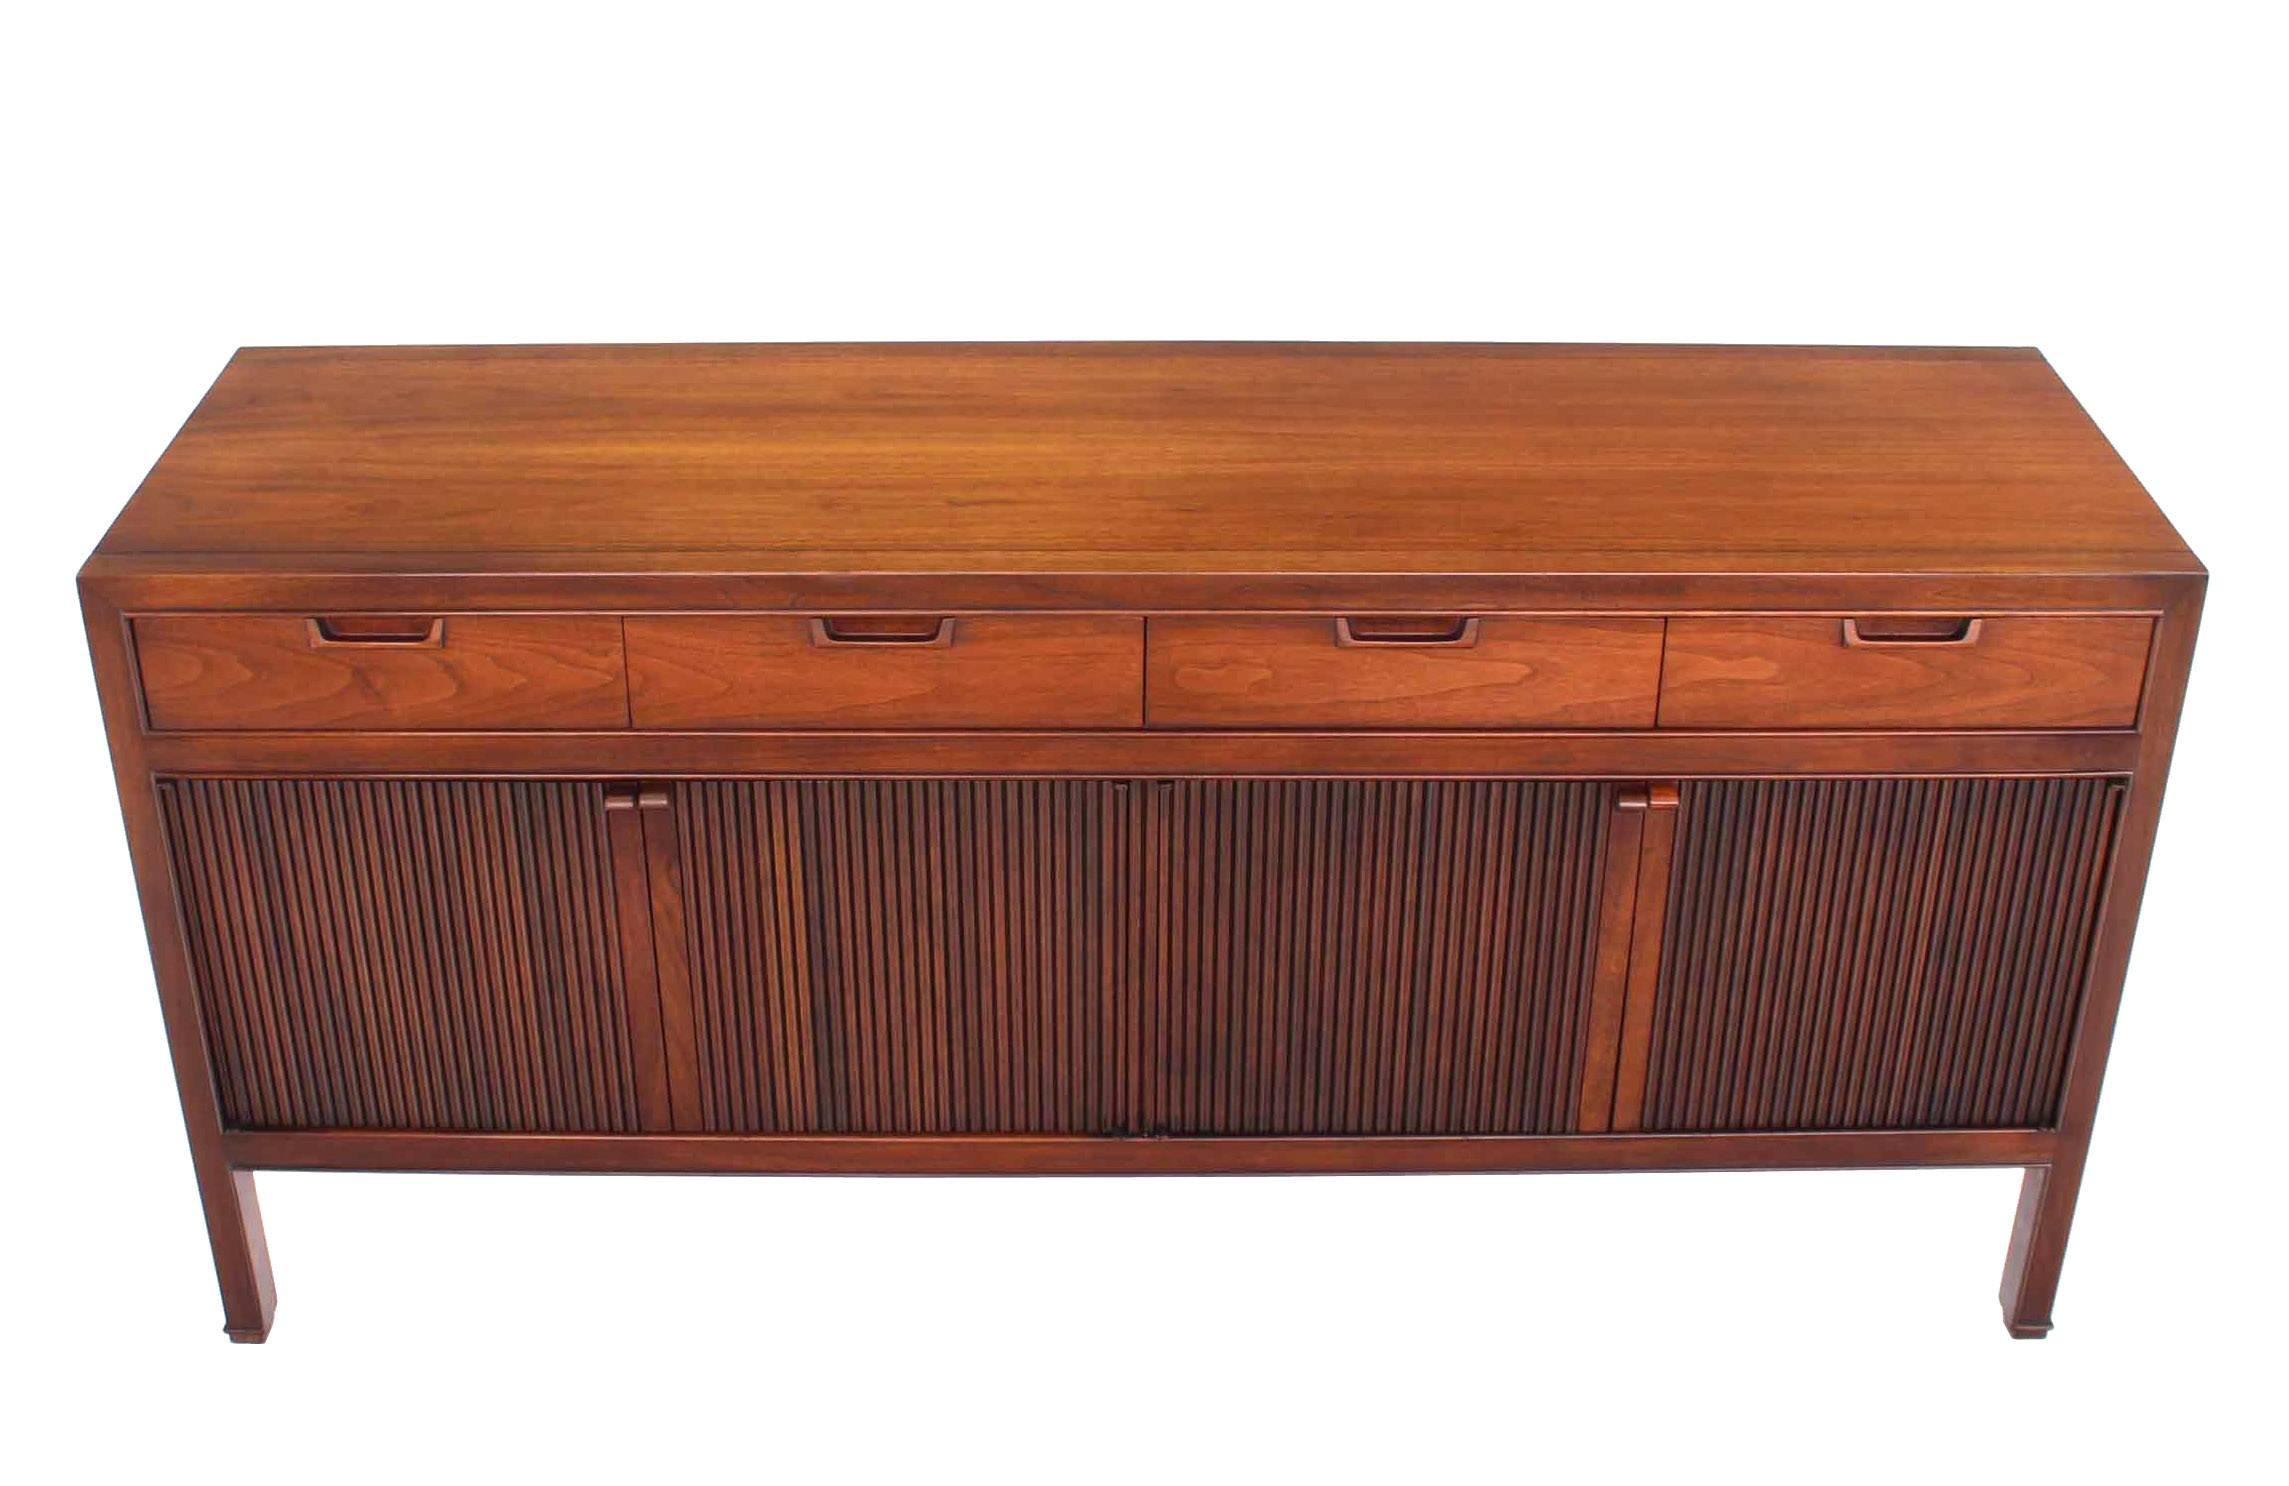 Super clean Mid Century Modern walnut long credenza dresser with fluted doors and four top drawers.